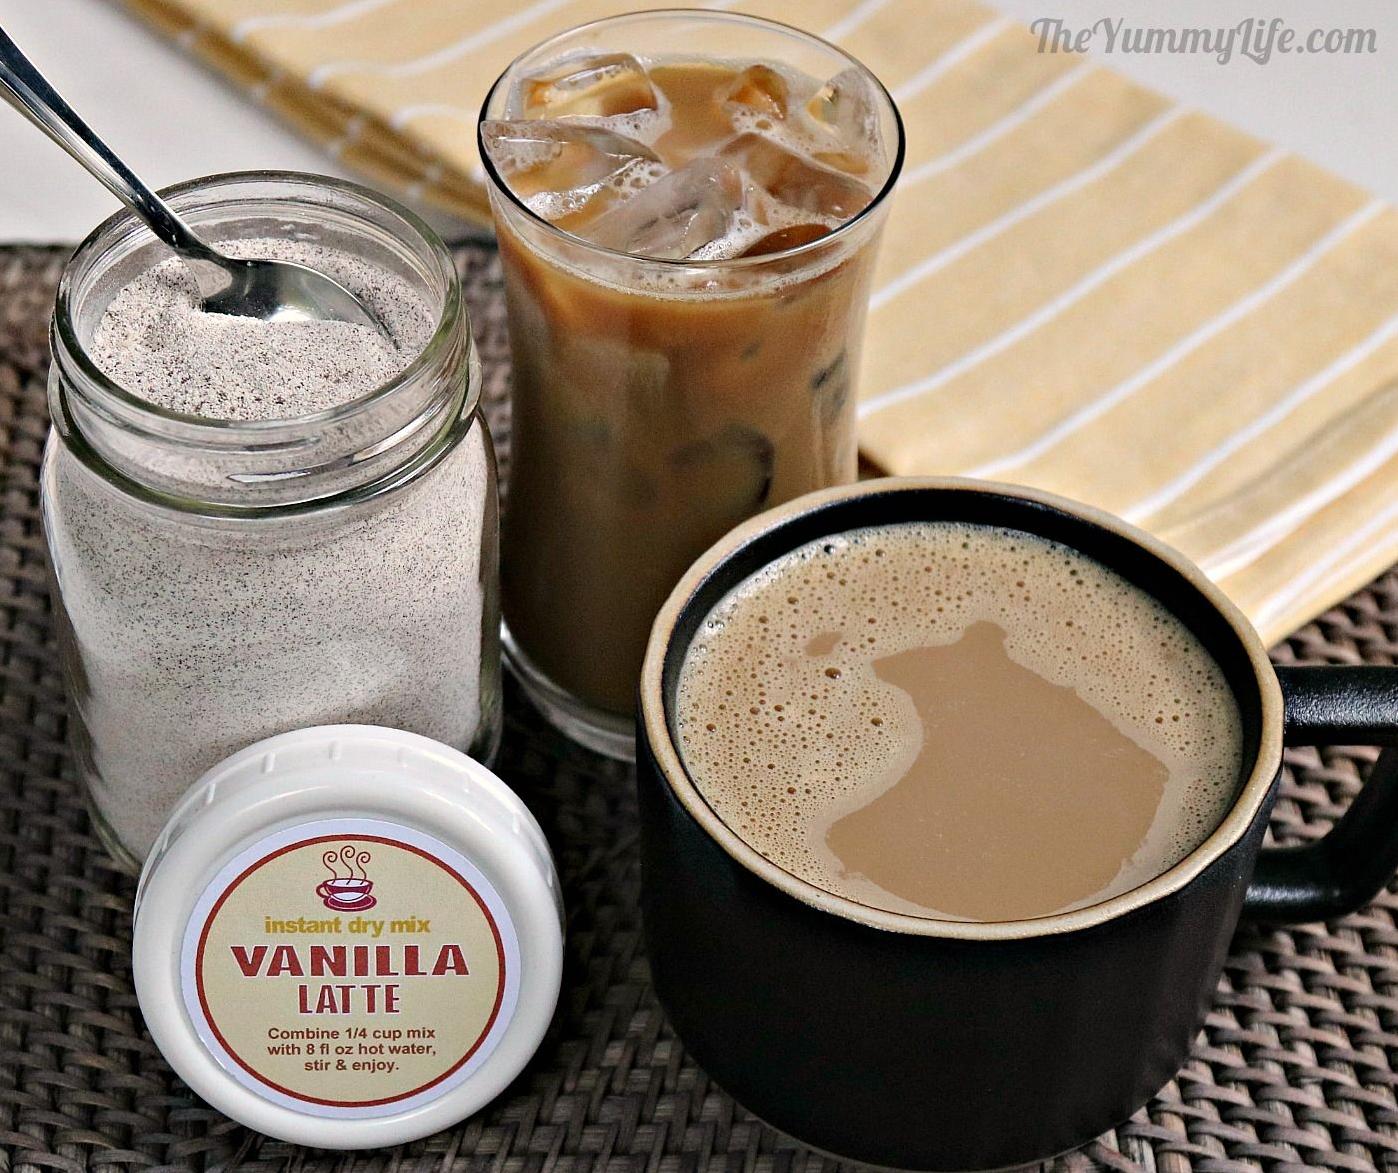  A burst of vanilla flavor in your morning cup of joe